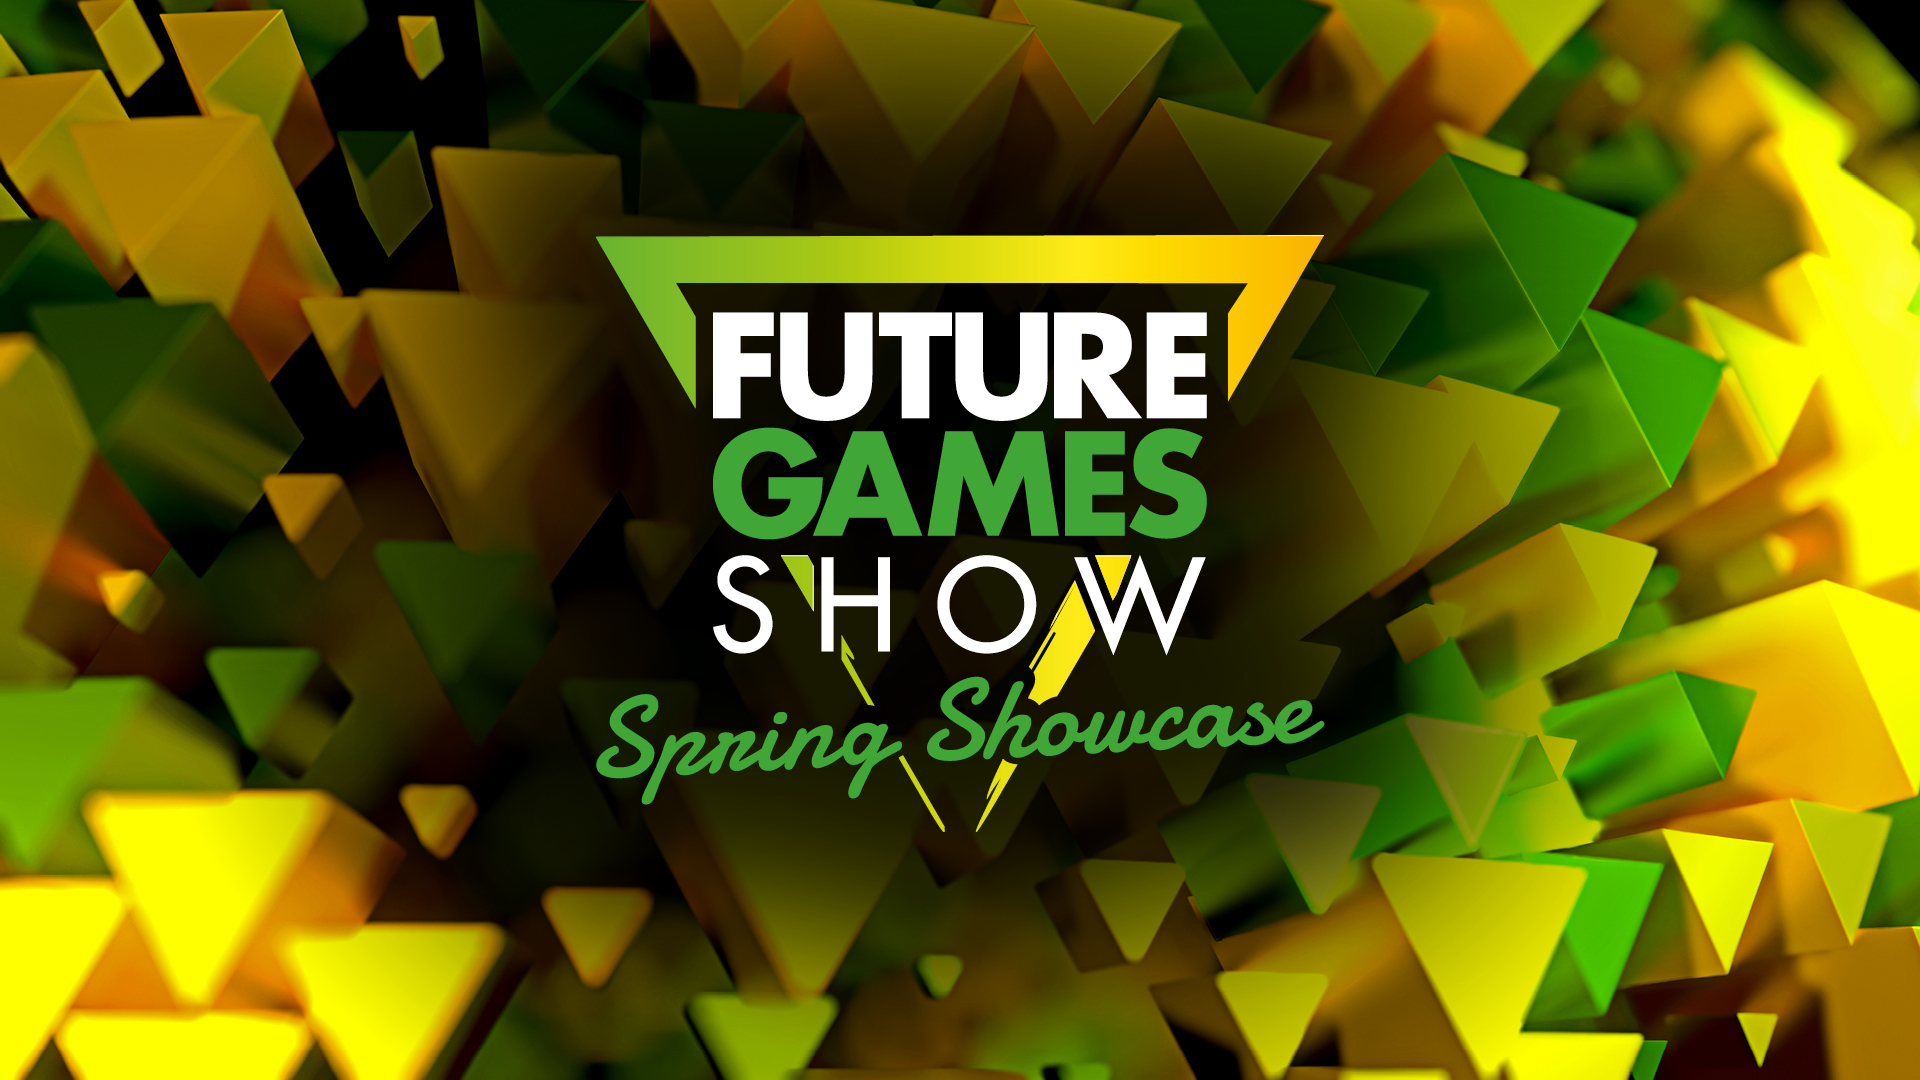  The Future Games show is returning next month and has a special guest: Karlach, who is helping to reveal 'over 40 games' 